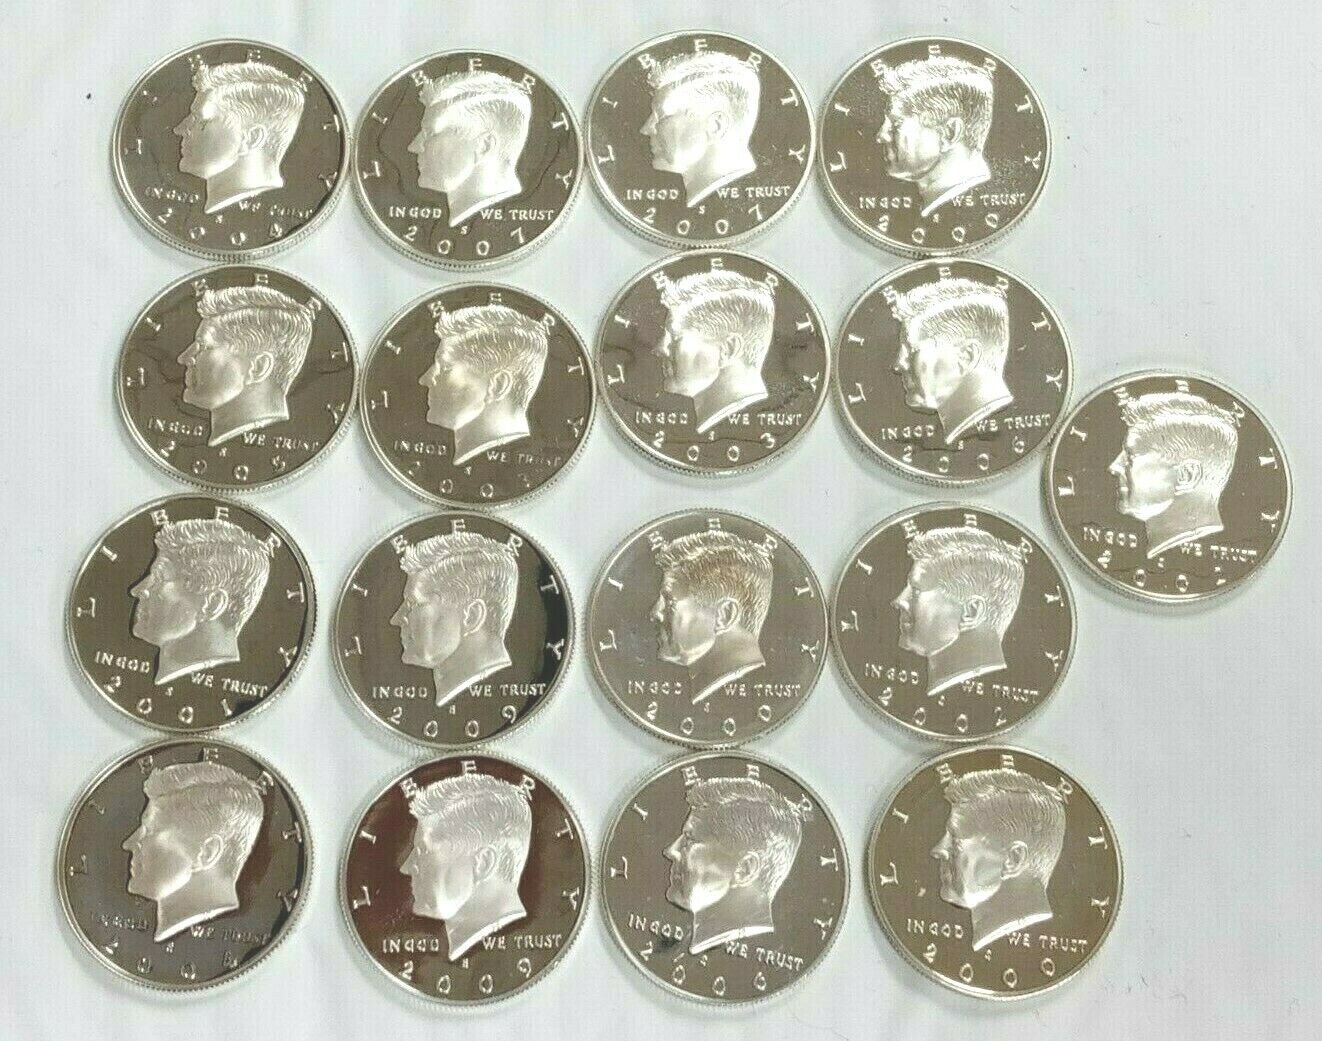 Lot of 17 GEM Deep Cameo Silver Proof Kennedys Half Dollars Mixed Dates L181 Без бренда